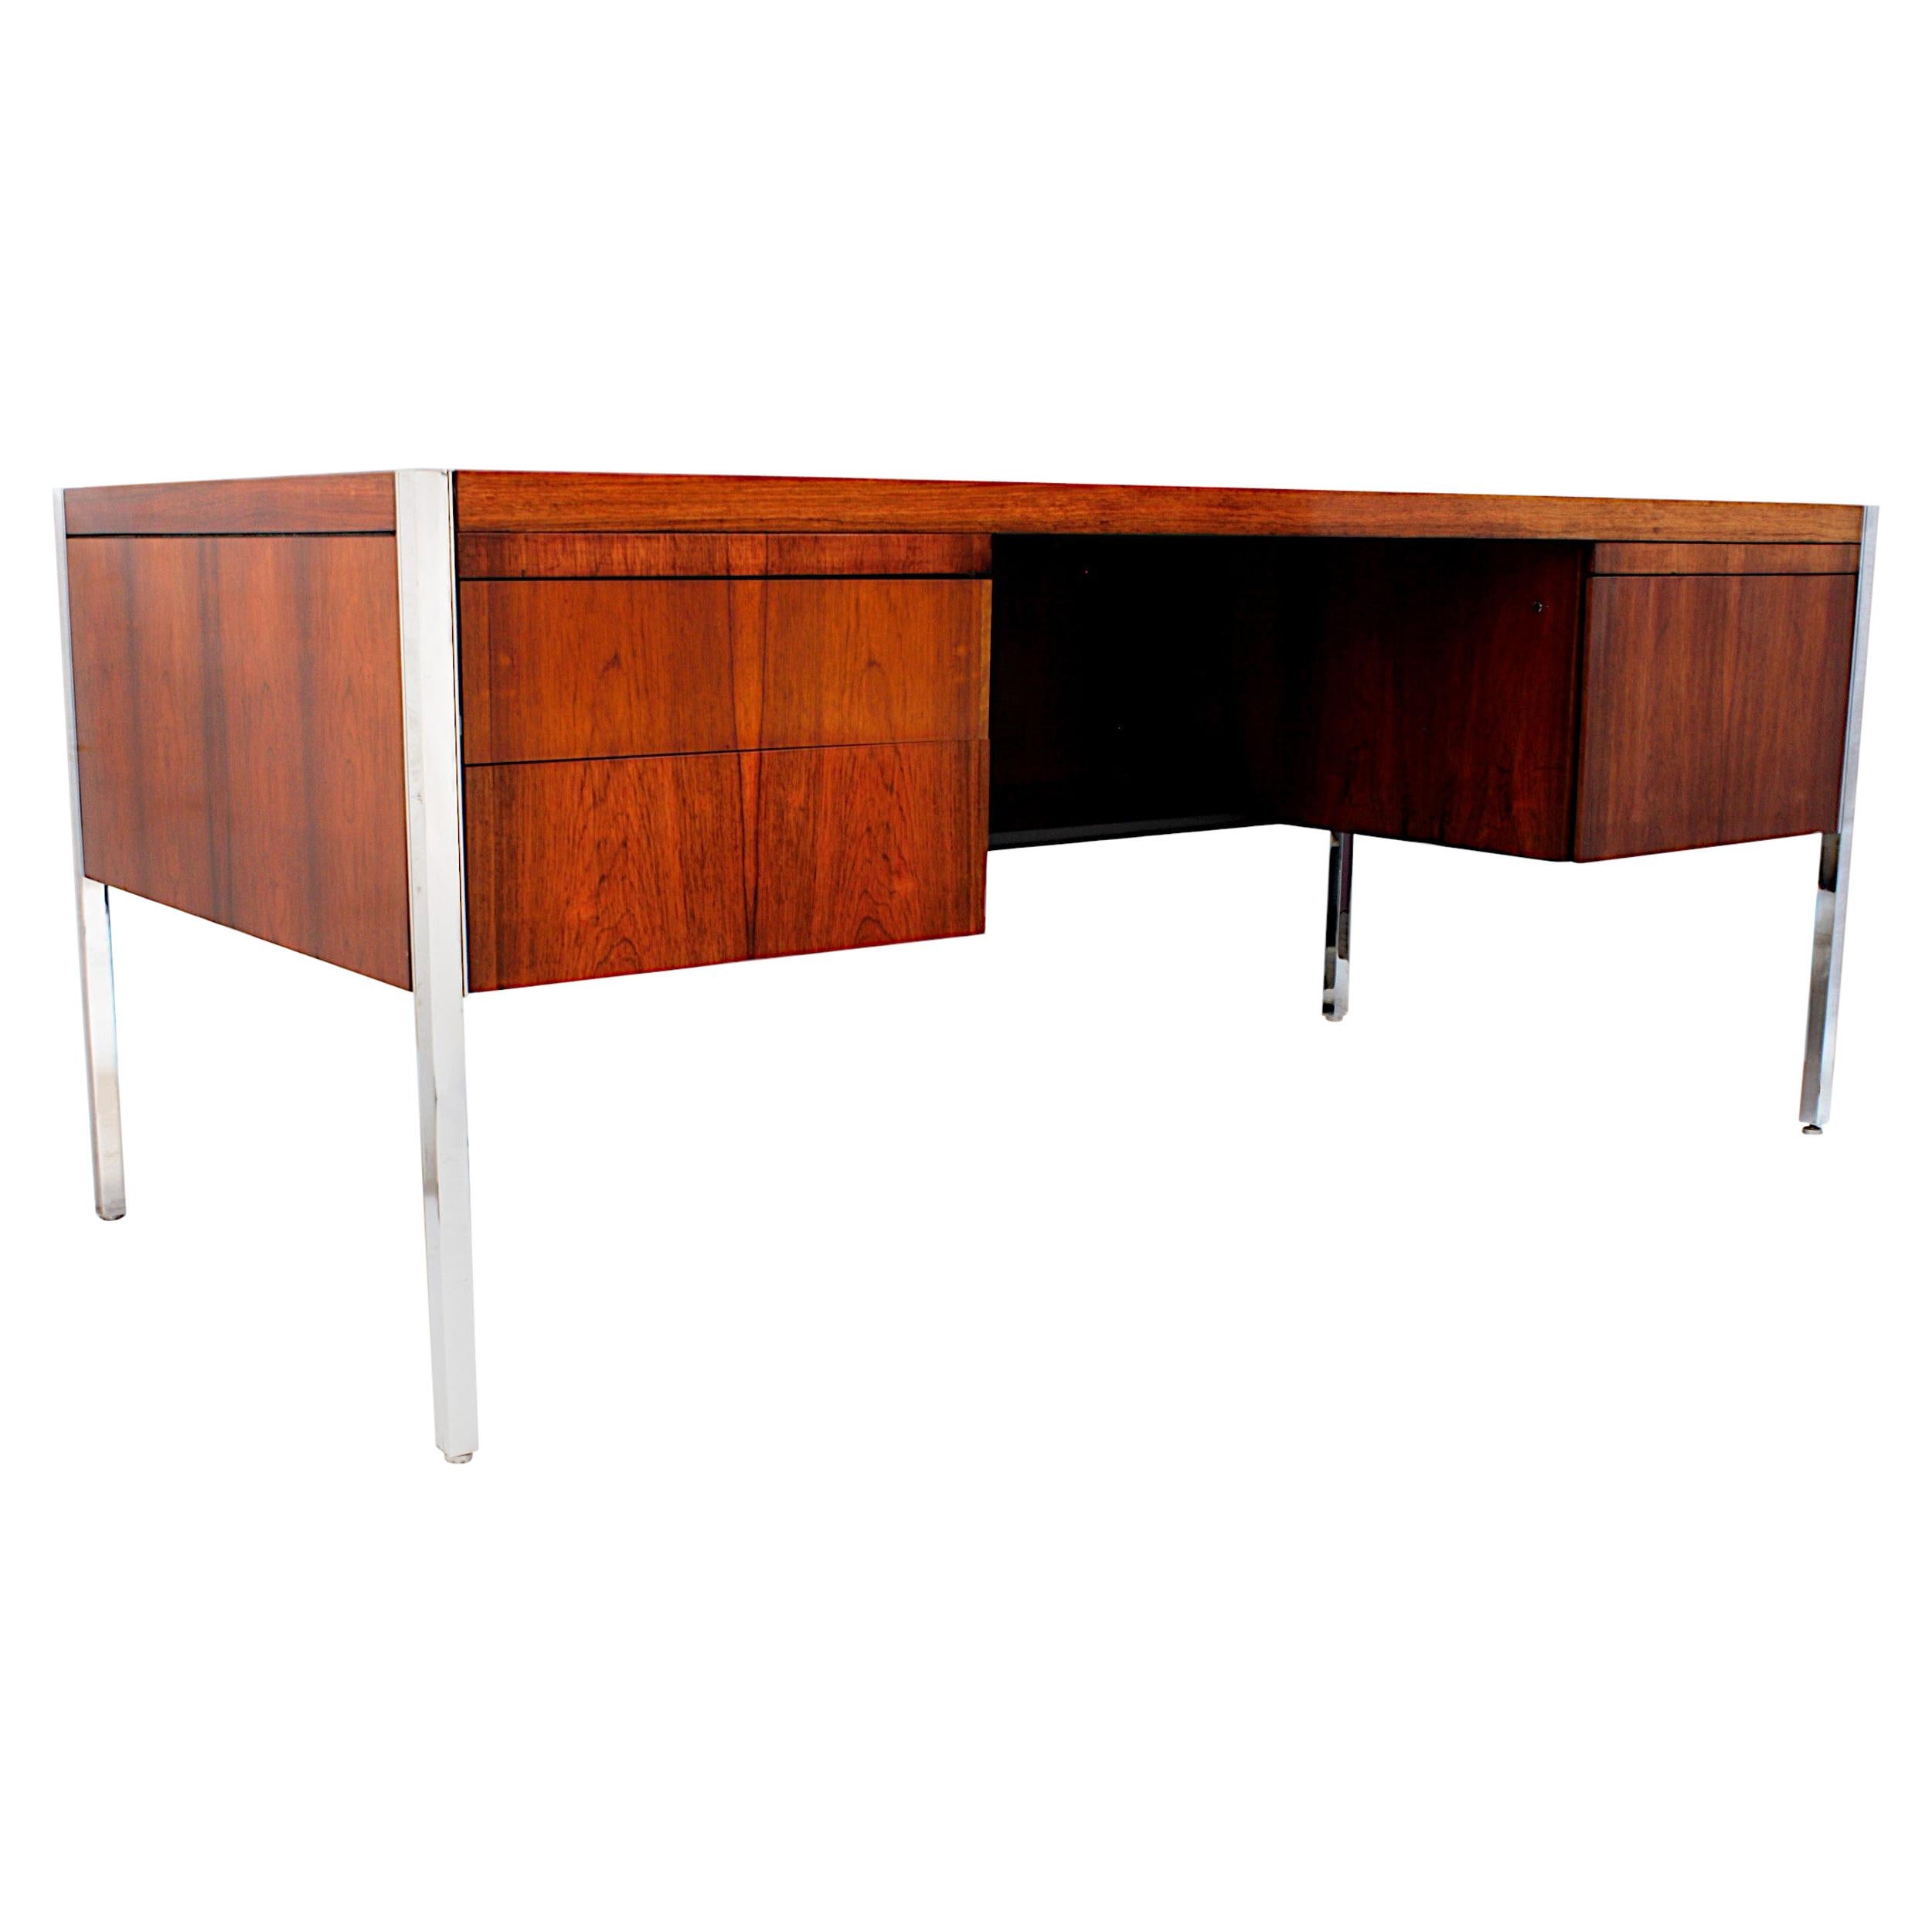 1970s Mid-Century Modern Rosewood Executive Desk by Richard Schultz for Knoll